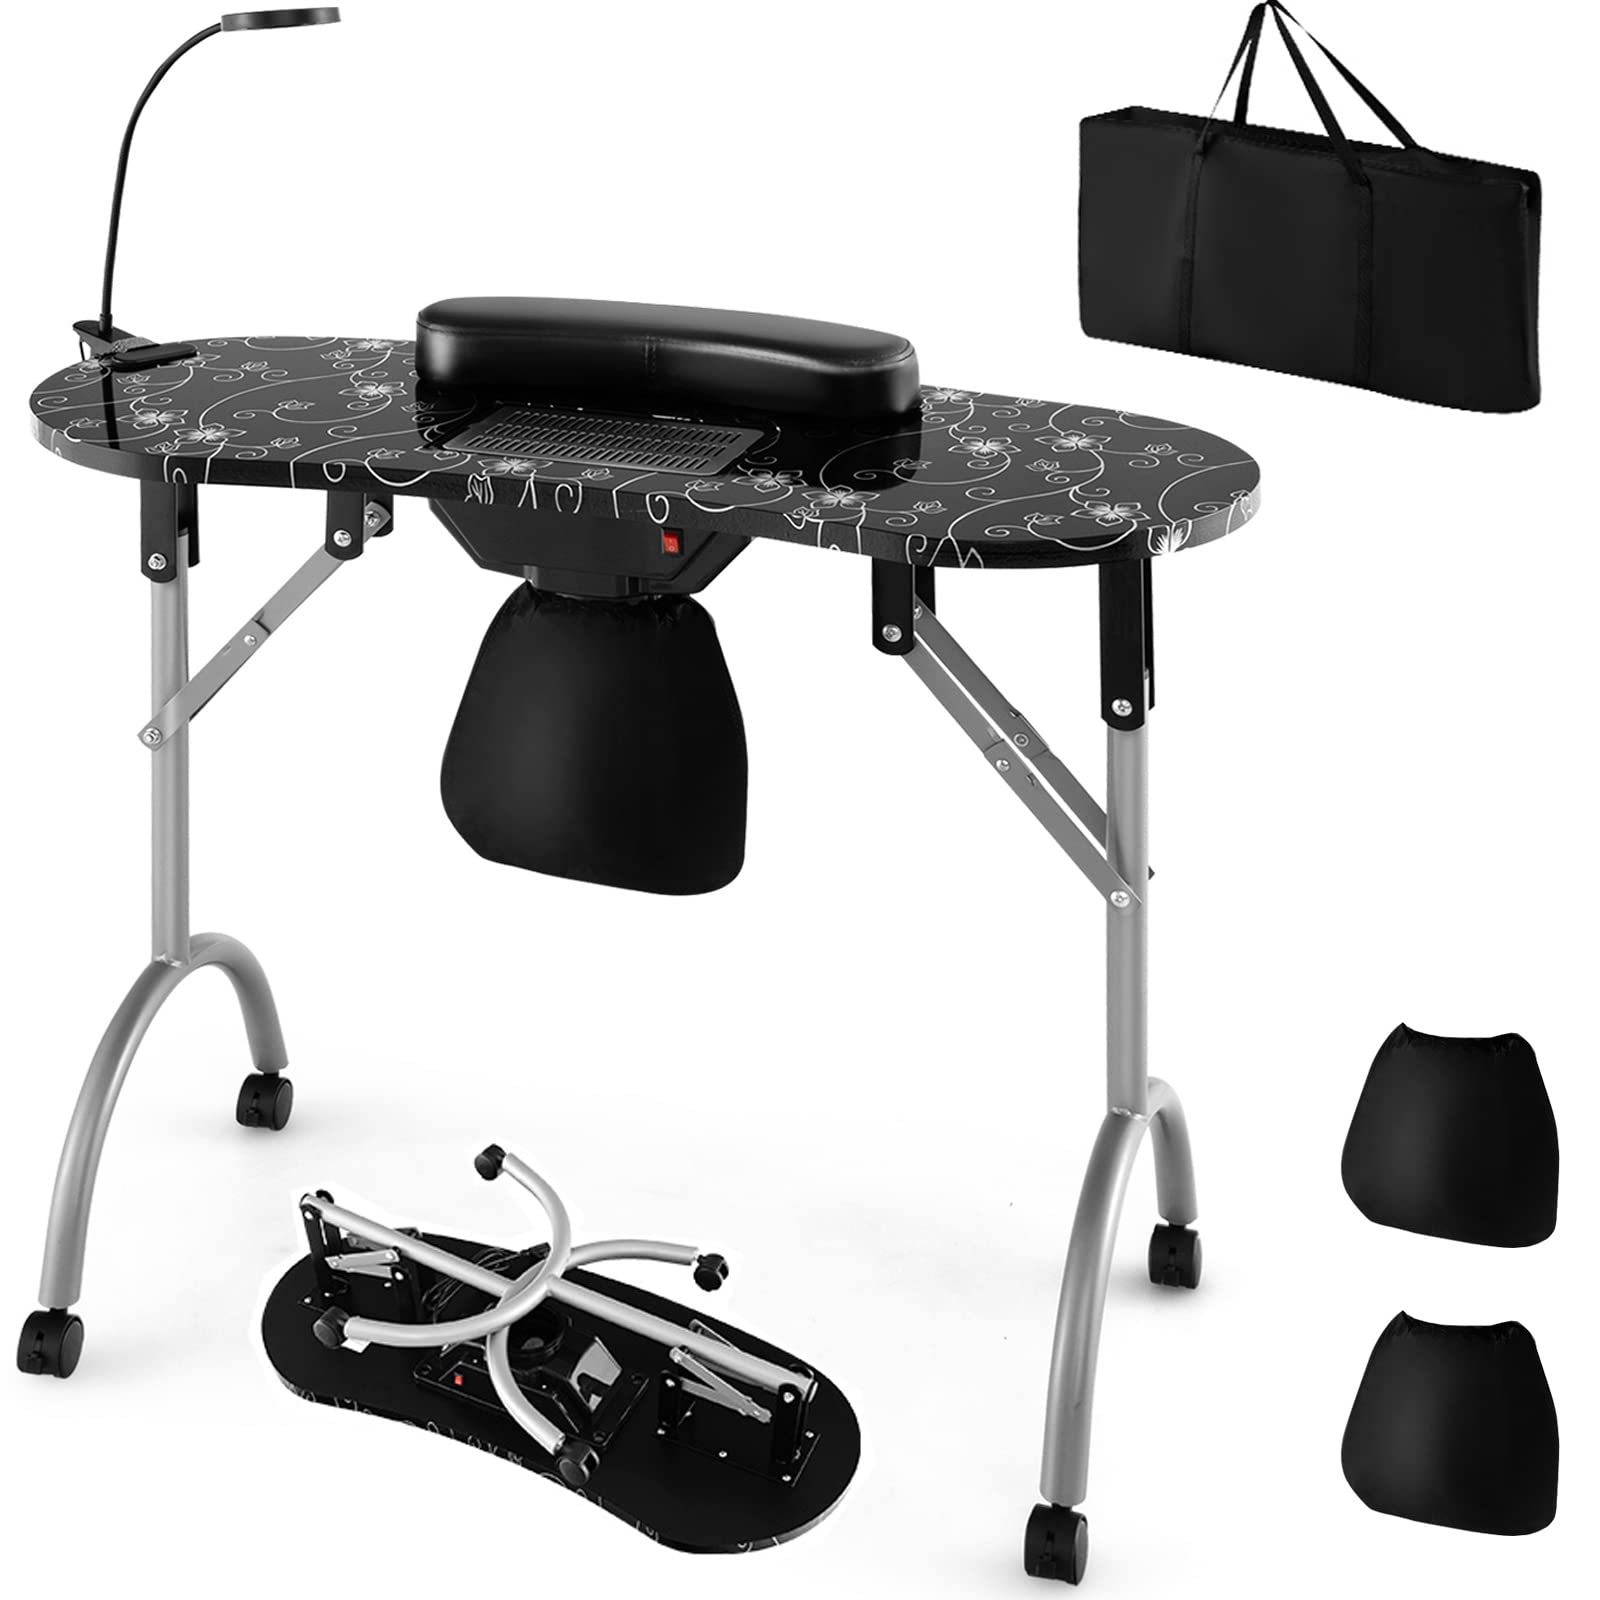 Giantex Nail Desk with Electric Dust Collector, Portable Manicure Table with USB-Plug LED Table Lamp